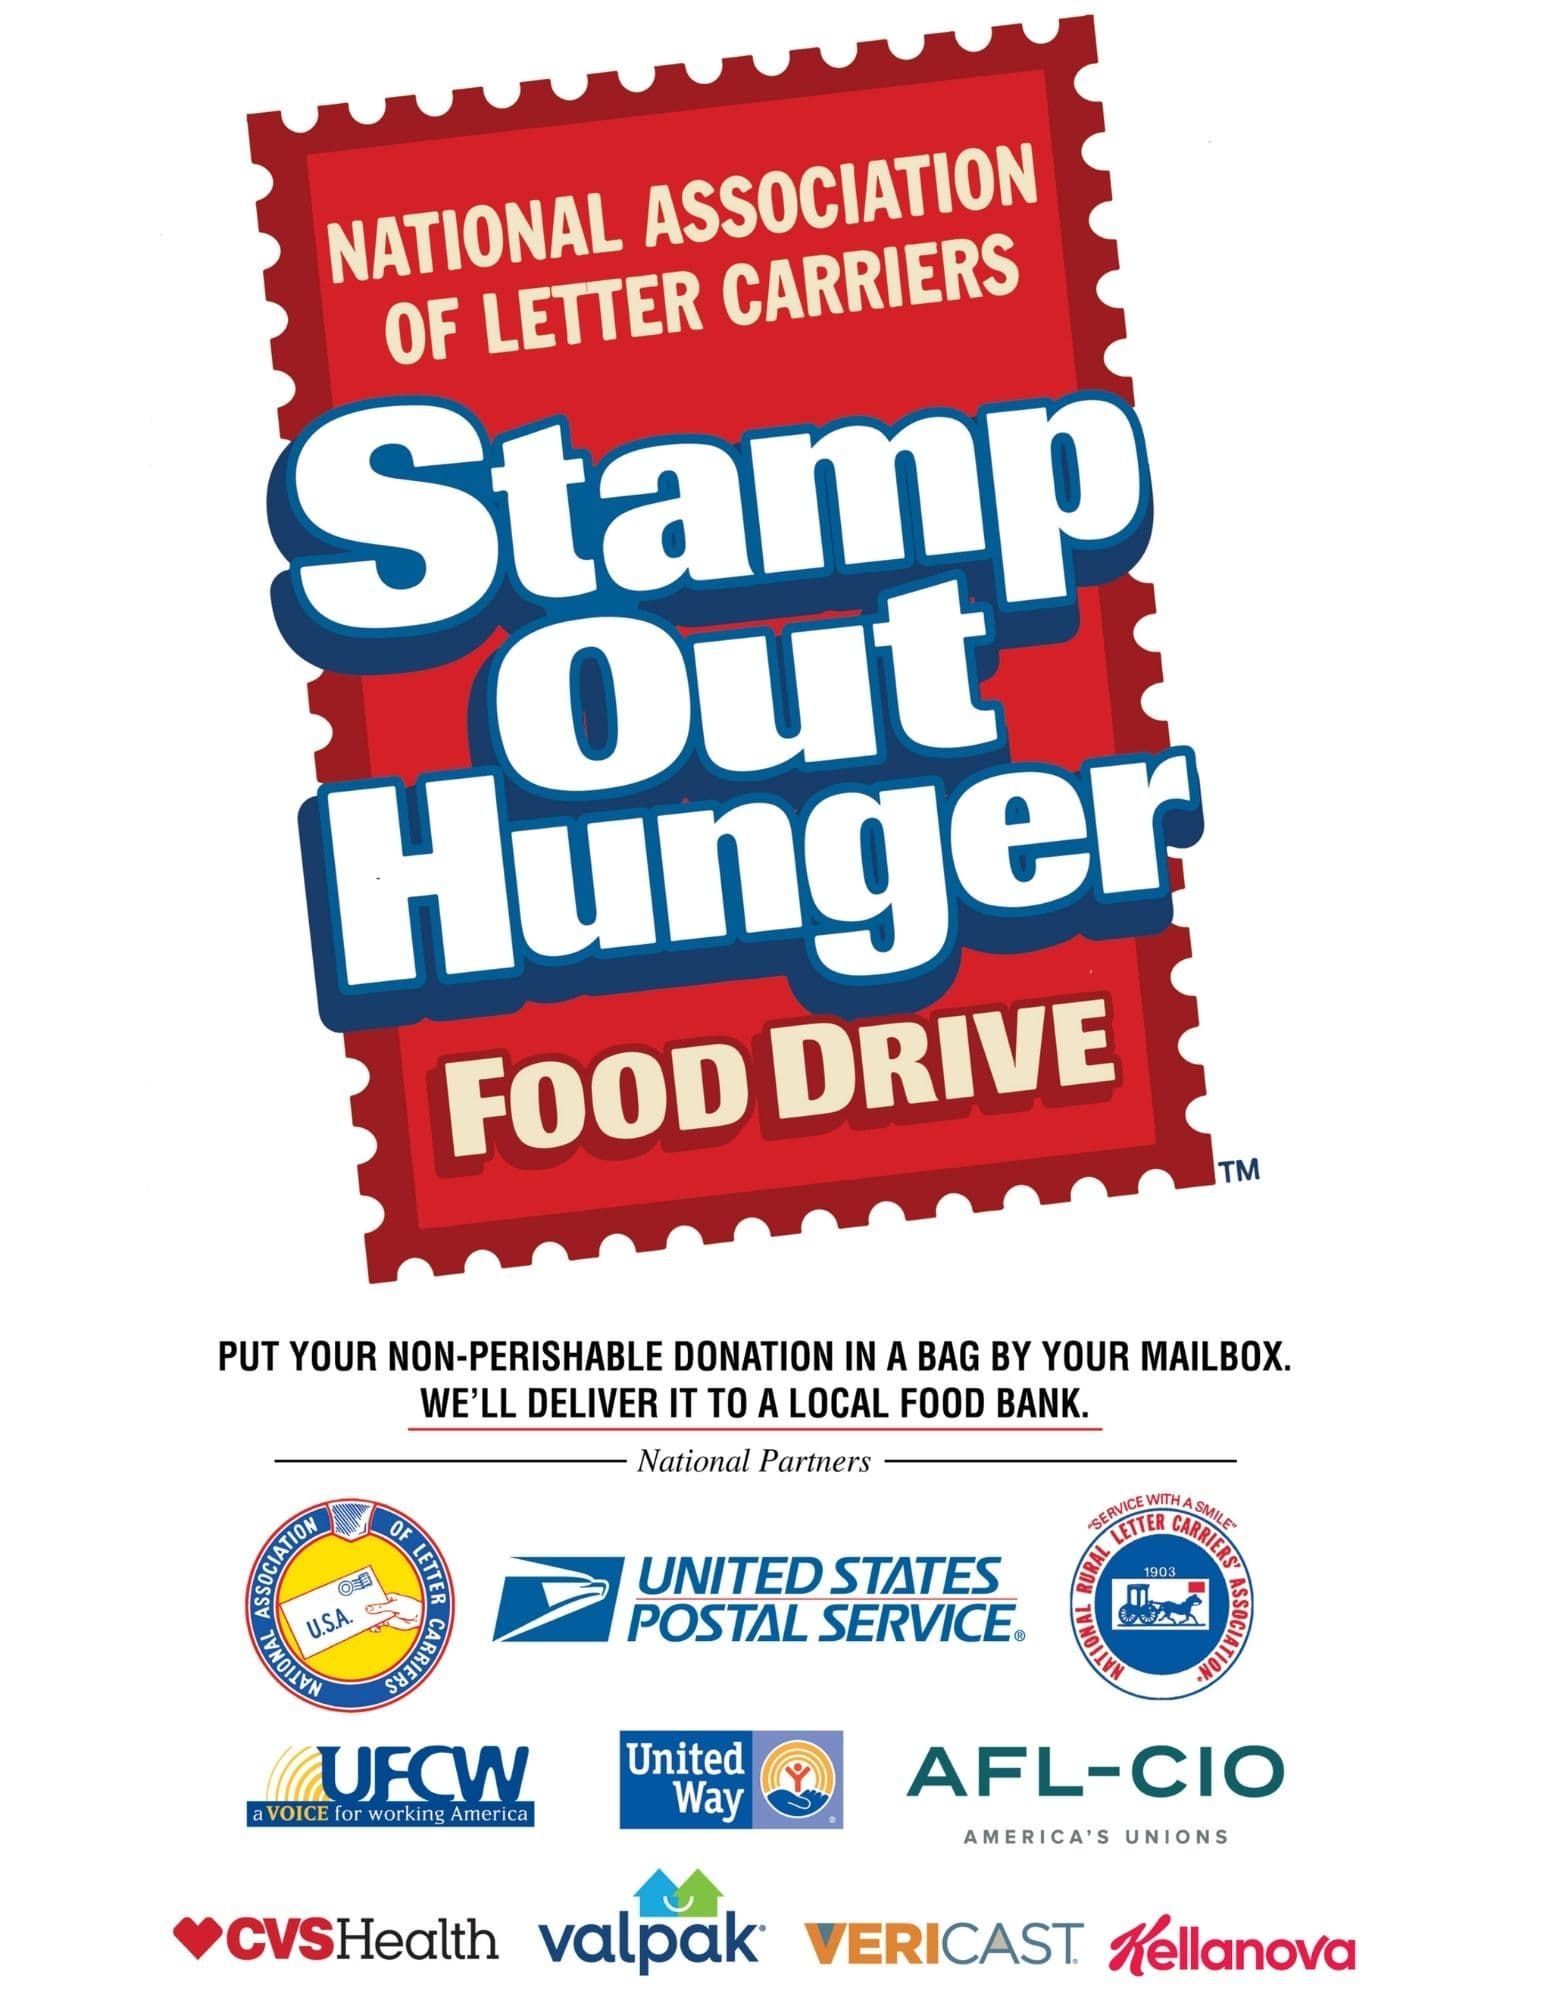 Stamp out hunger, food drive, palm beach county food drive